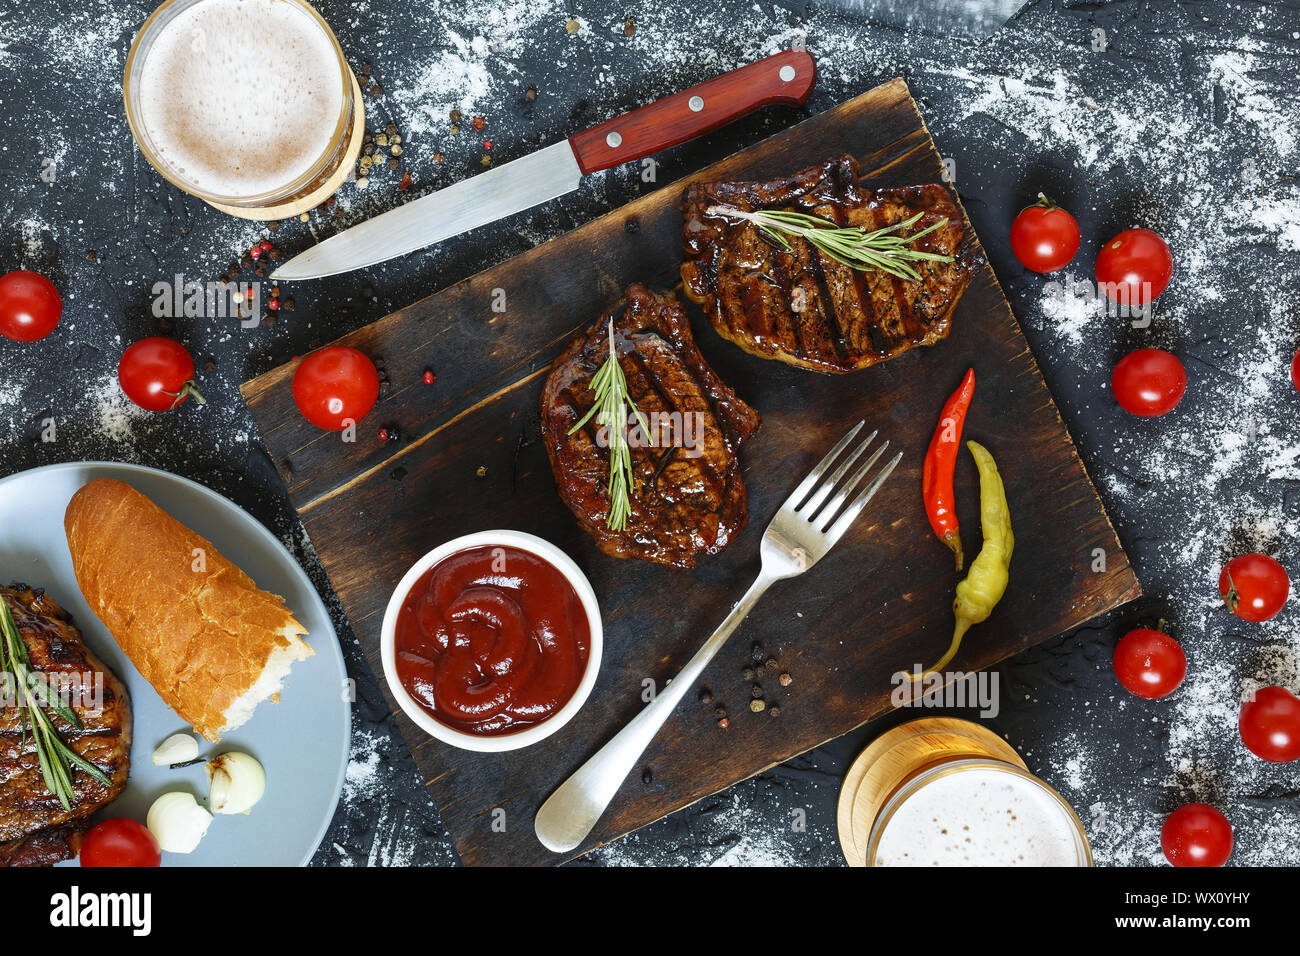 Grilled, Black, Angus, Steak, tomatoes, top view, garlic, chimichurri sauce, meat, cutting board, to Stock Photo